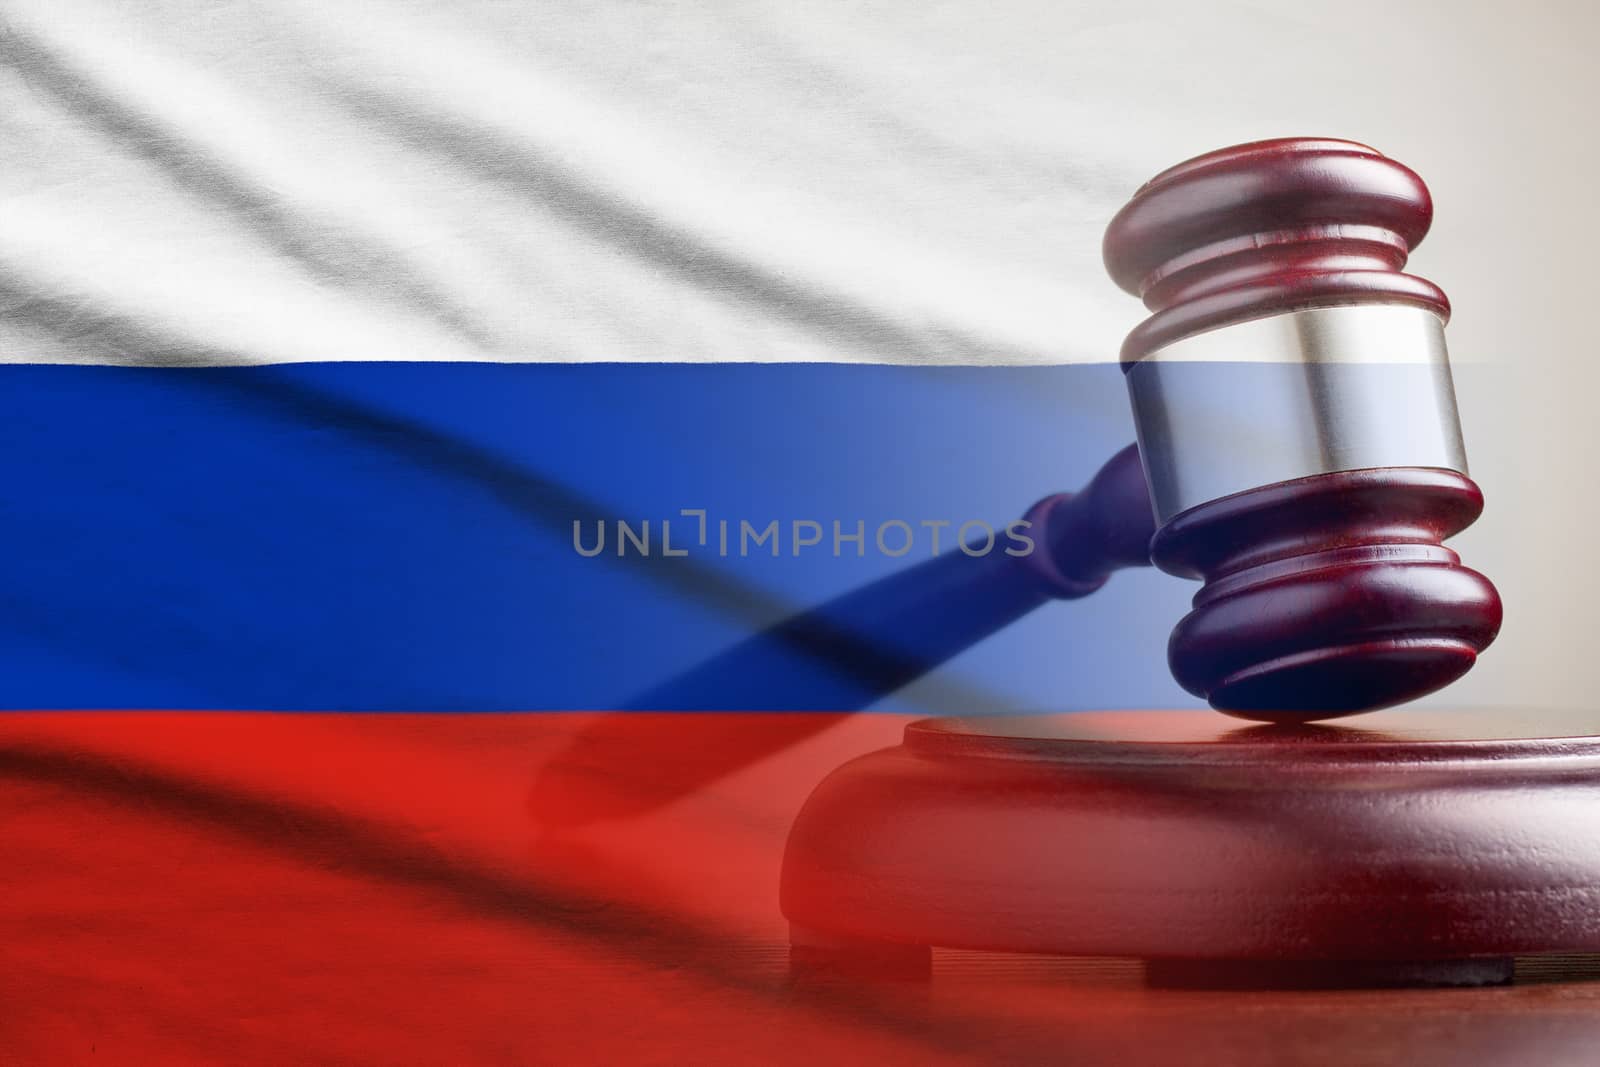 Legal gavel on its plinth over a flag of the Russia in a conceptual composite image